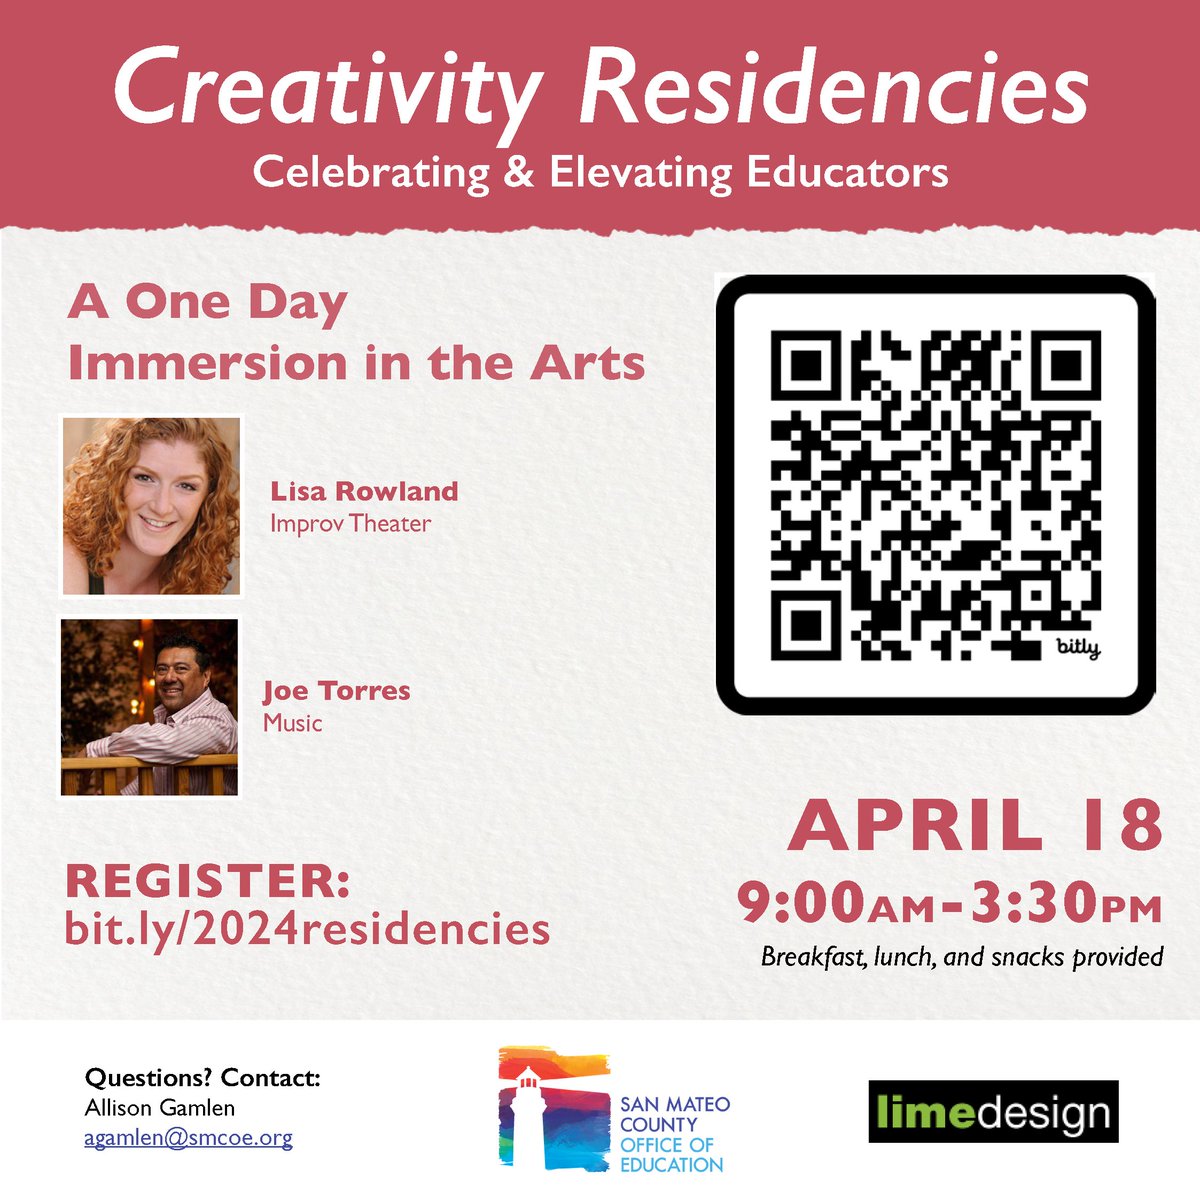 We are thrilled to collaborate again with Lime Design Associates & offer Creativity Residencies to San Mateo County teachers! Creativity Residencies is a free, one-day, in-person professional development opportunity for all PreK-12 educators. Register at bit.ly/2024residencies